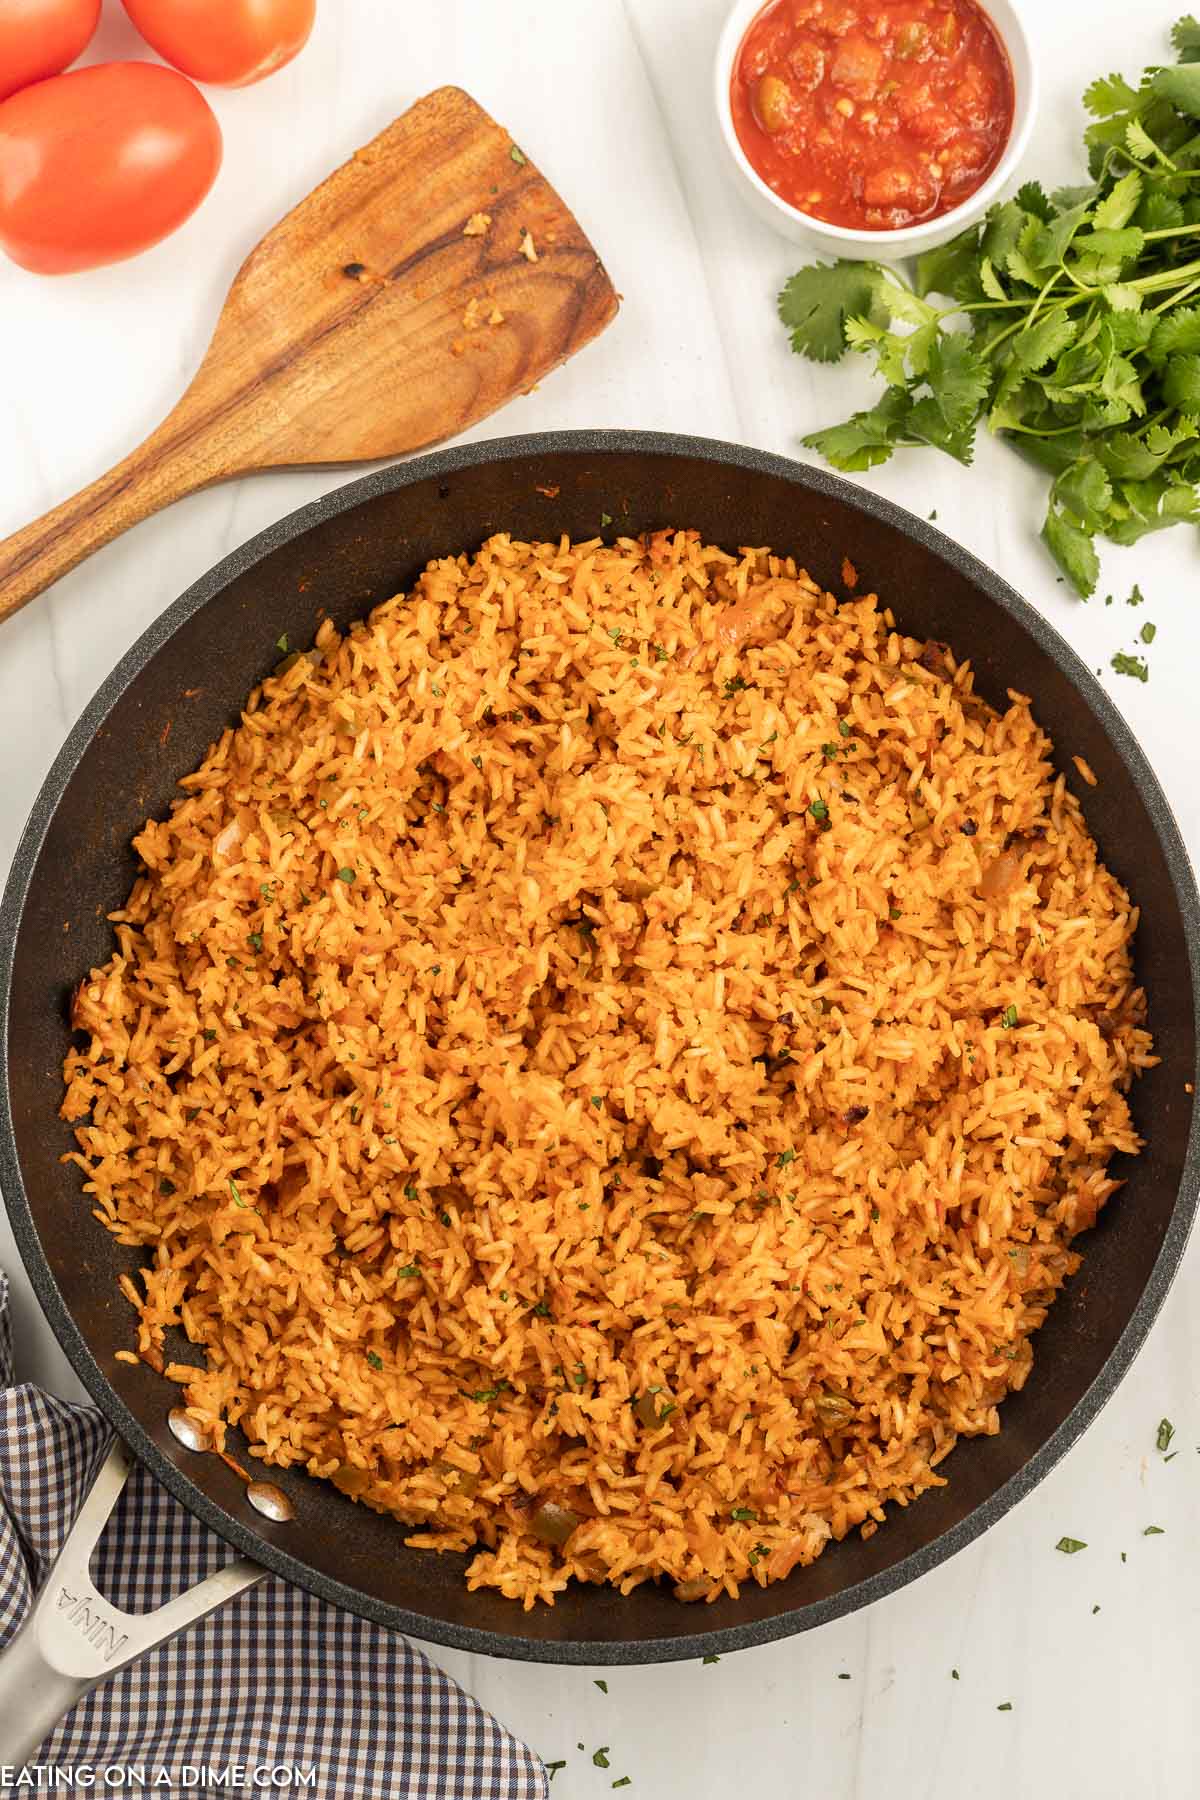 The liquid is the skillet has been absorbed by the rice and the Spanish Rice is ready in the skillet to be enjoyed. 